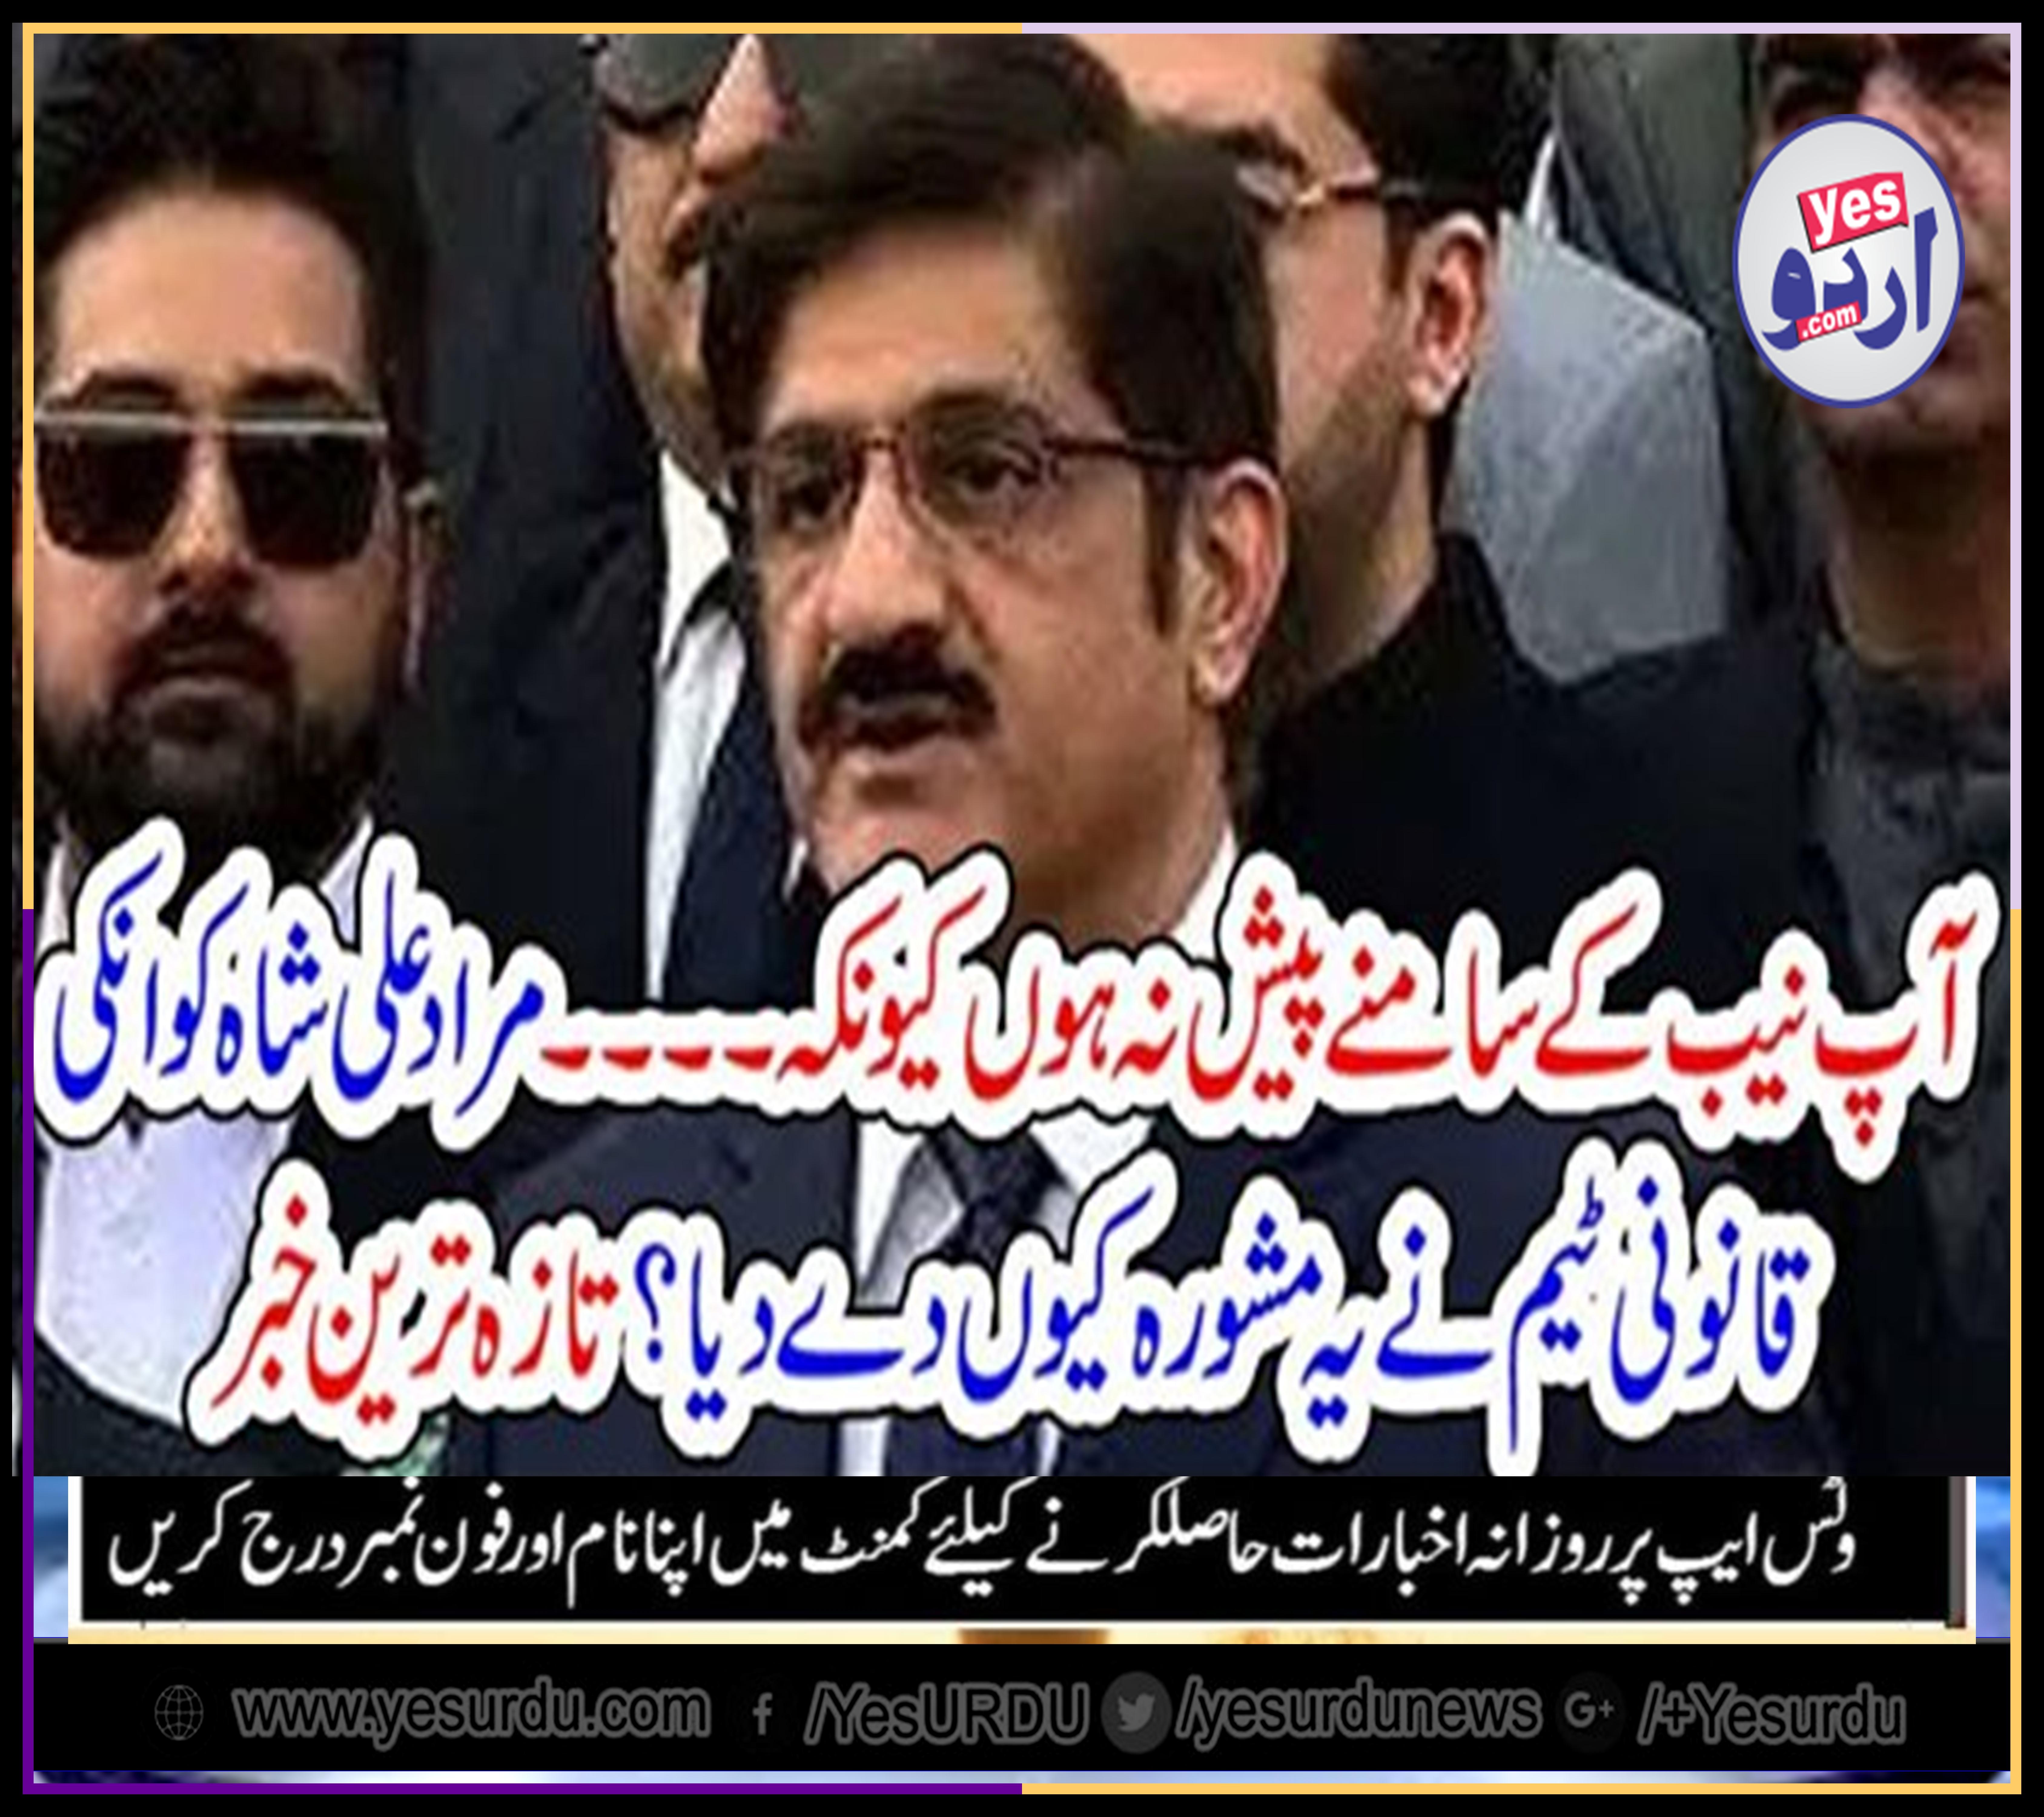 CM, SINDH, MURAD ALI SHAH, NOT, APPEARED, BEFORE, THE, NAB, COURT, TODAY, WHY, HIS, LAW, TEAM, SUGGEST, TO, DO, SO